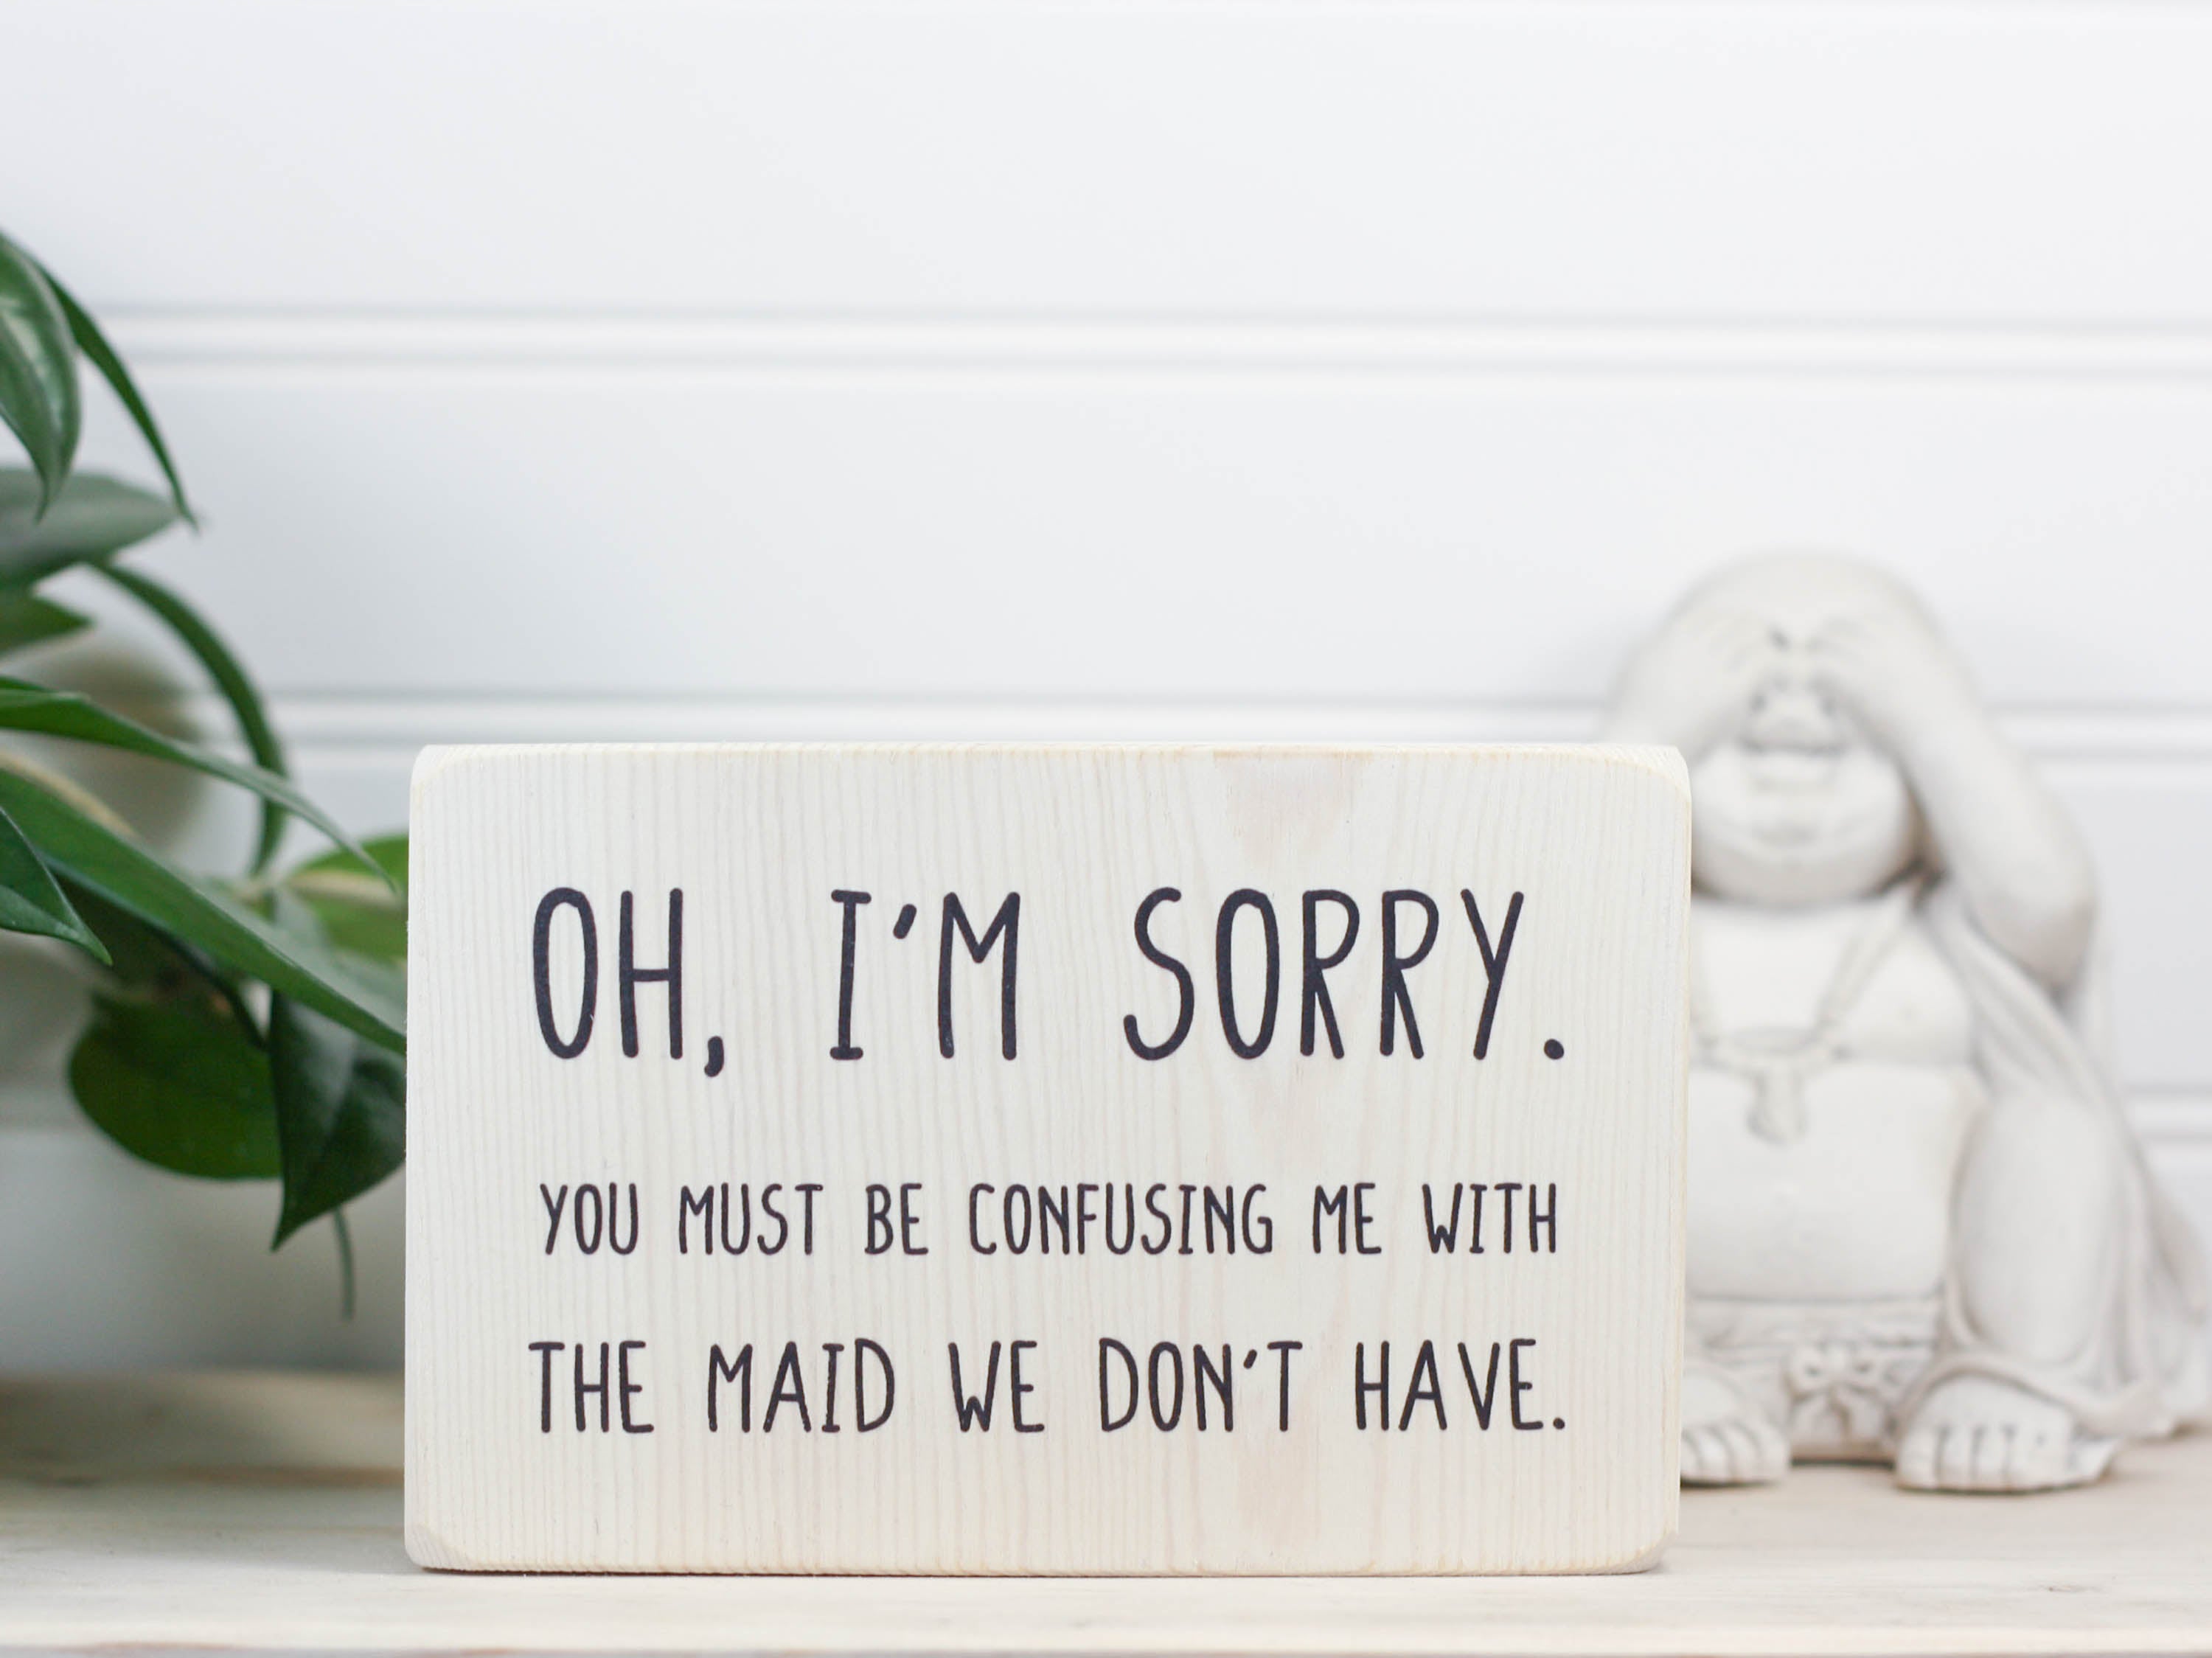 Small wood decor sign in whitewash with the saying "Oh, I'm sorry. You must be confusing me with the maid we don't have."